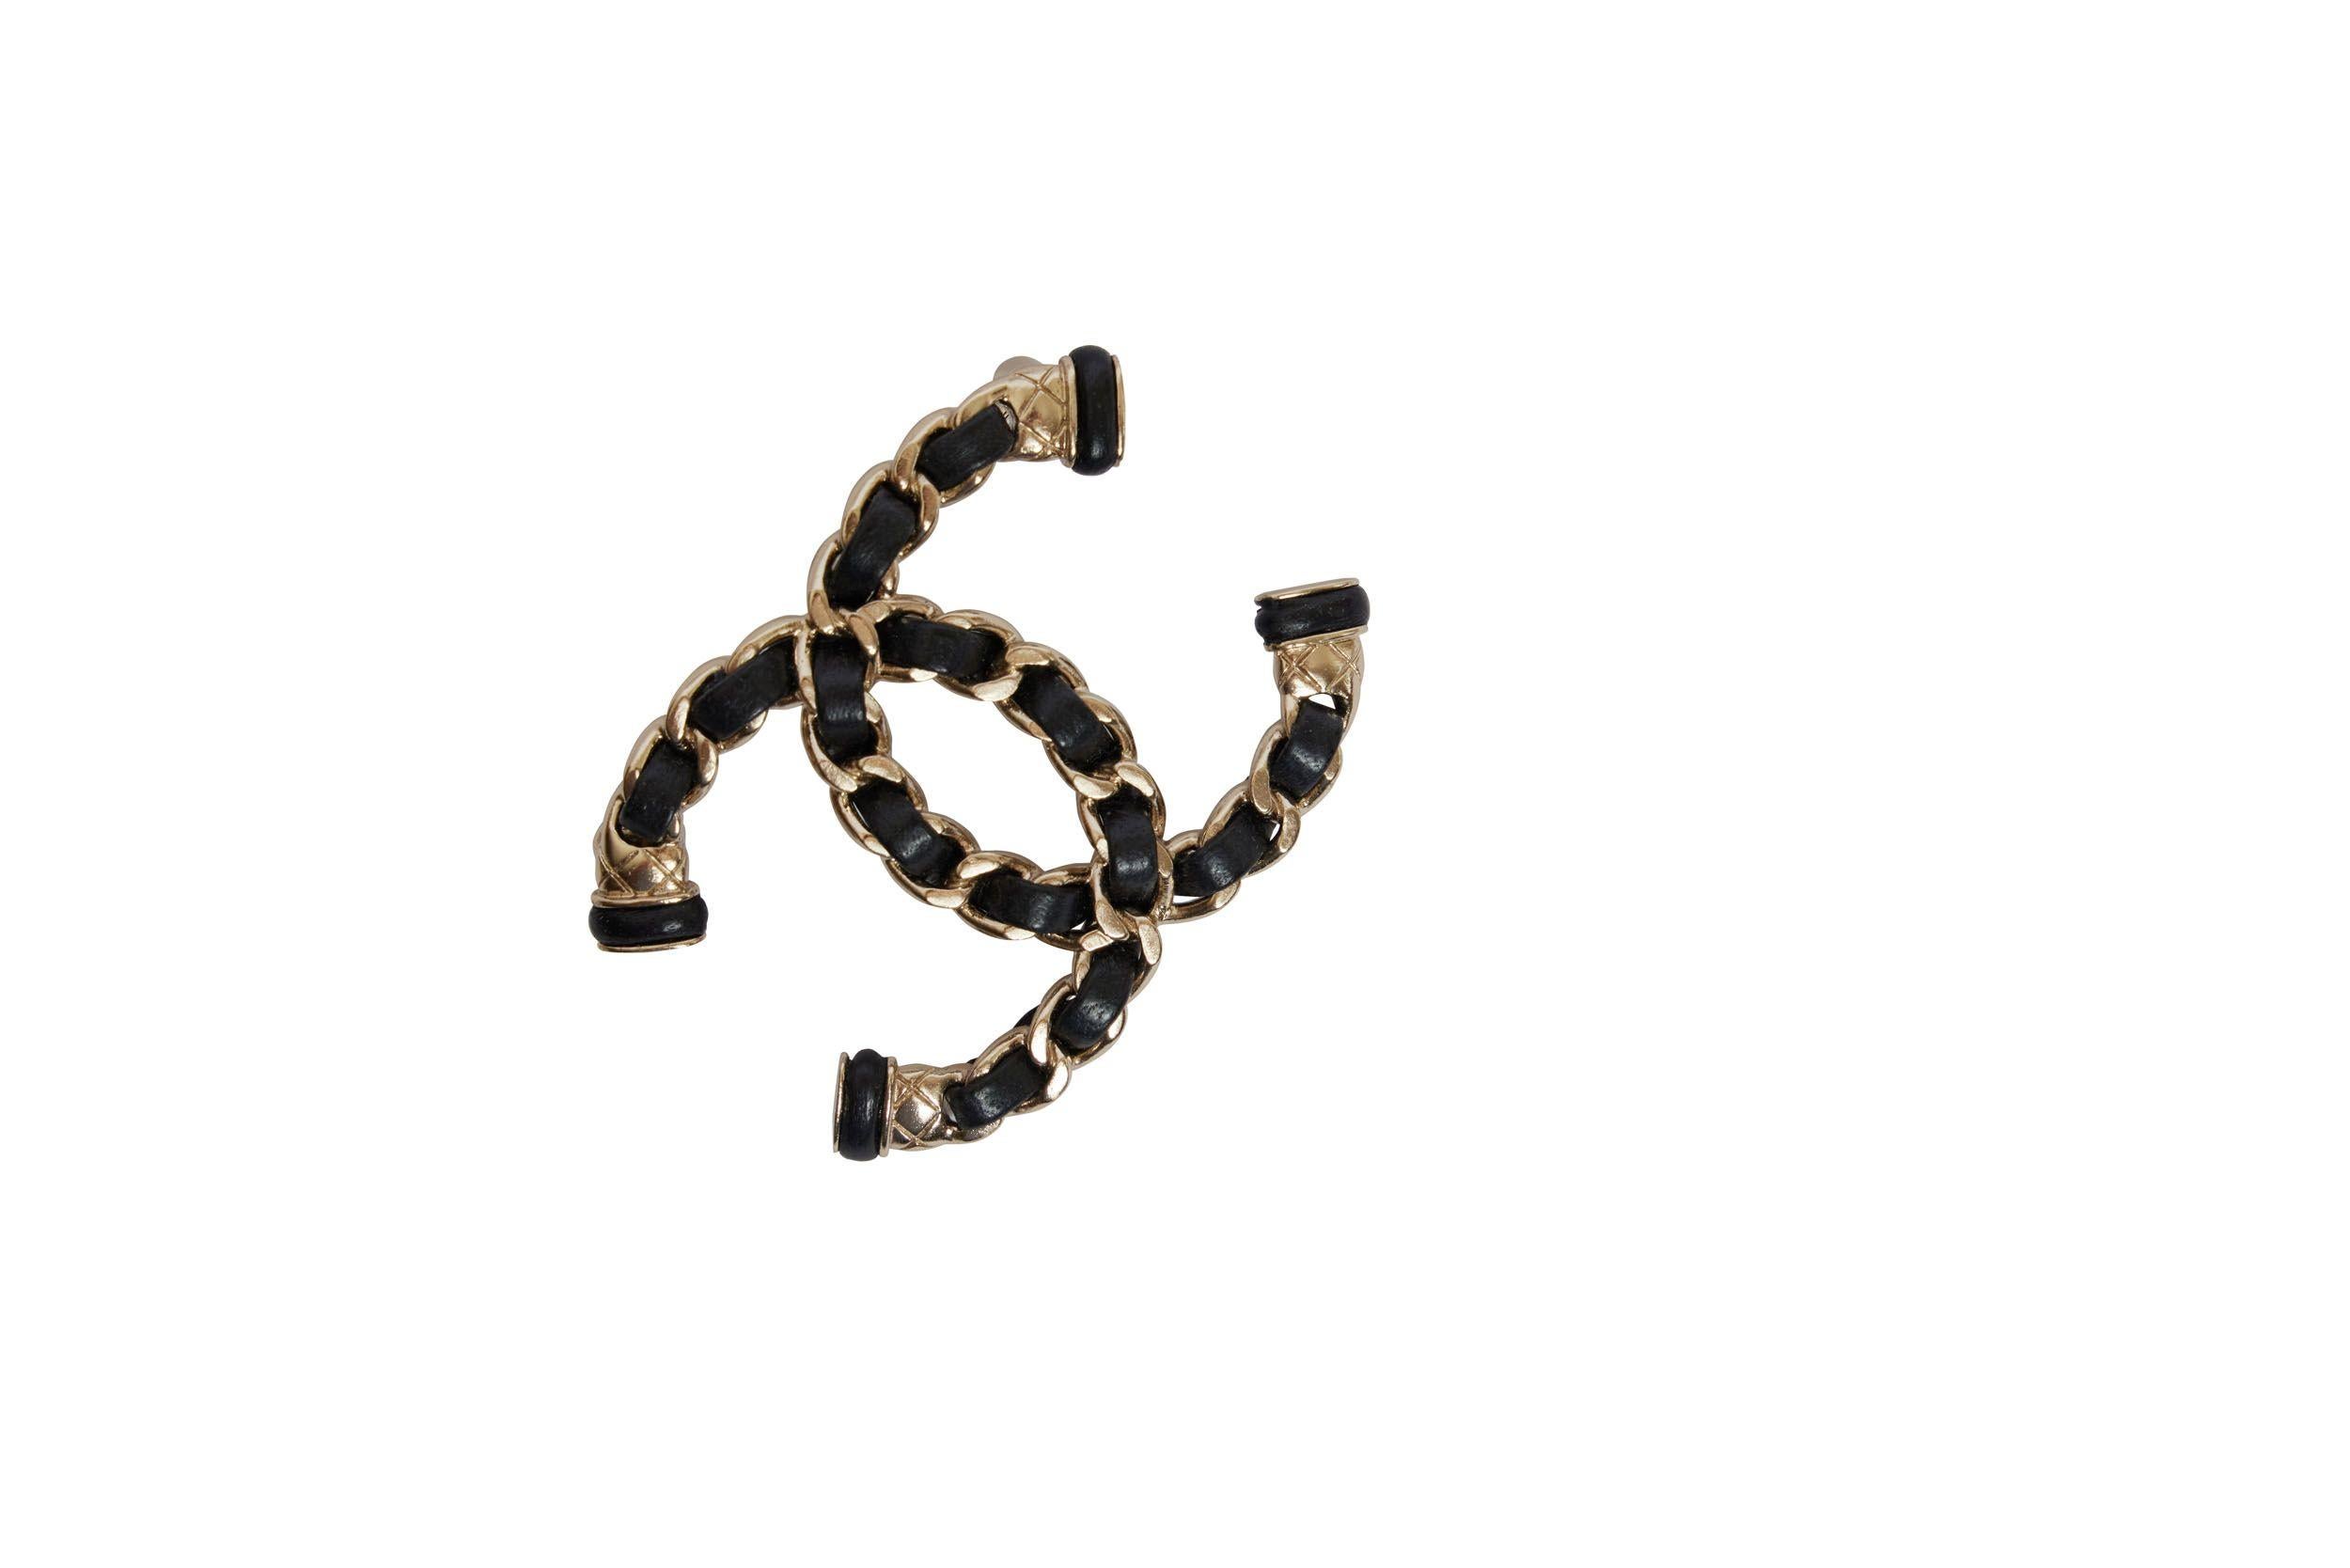 This CC logo brooch is made out of the typical Chanel handbag chain. It is silver metal with black lambskin leather. It is perfect for the evening but also cute with a jeans and blazer for everyday.